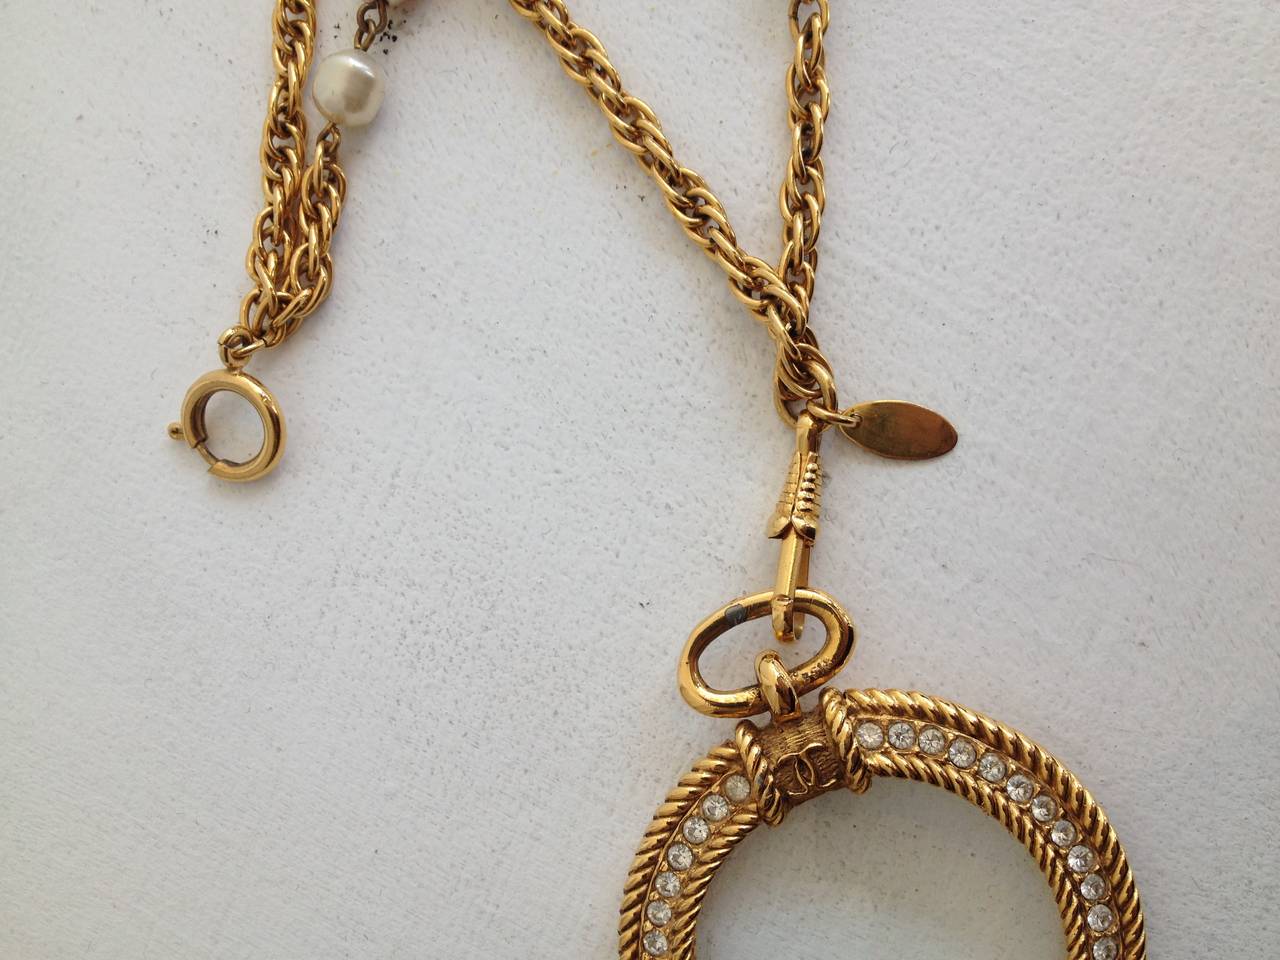 Women's Chanel Gold Necklace with Pearls and Magnifying Glass